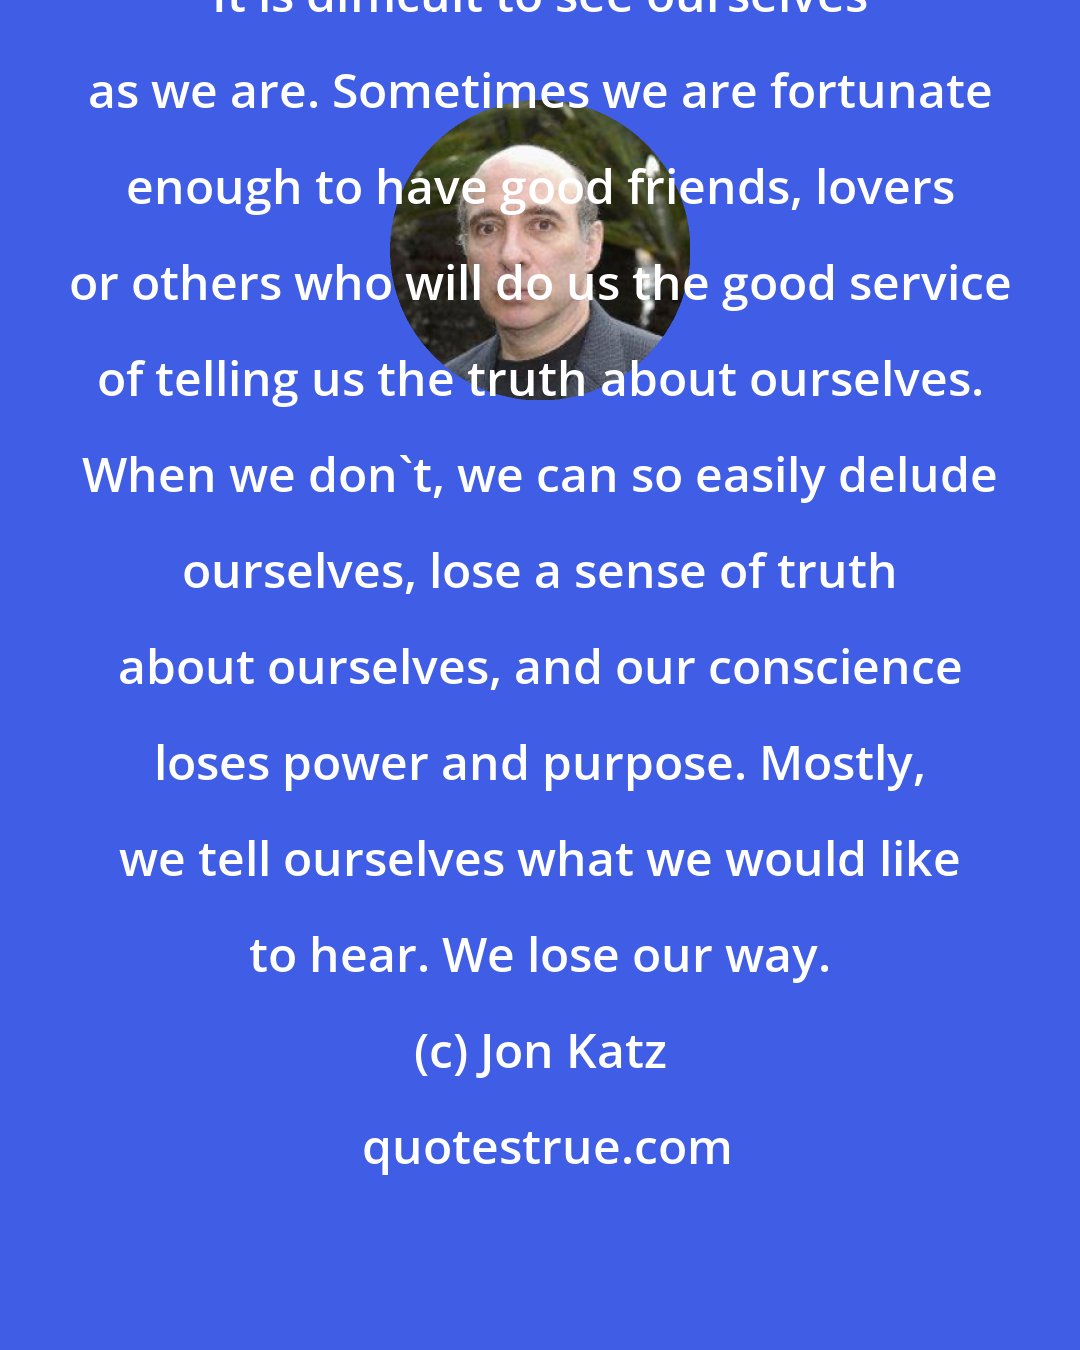 Jon Katz: It is difficult to see ourselves as we are. Sometimes we are fortunate enough to have good friends, lovers or others who will do us the good service of telling us the truth about ourselves. When we don't, we can so easily delude ourselves, lose a sense of truth about ourselves, and our conscience loses power and purpose. Mostly, we tell ourselves what we would like to hear. We lose our way.